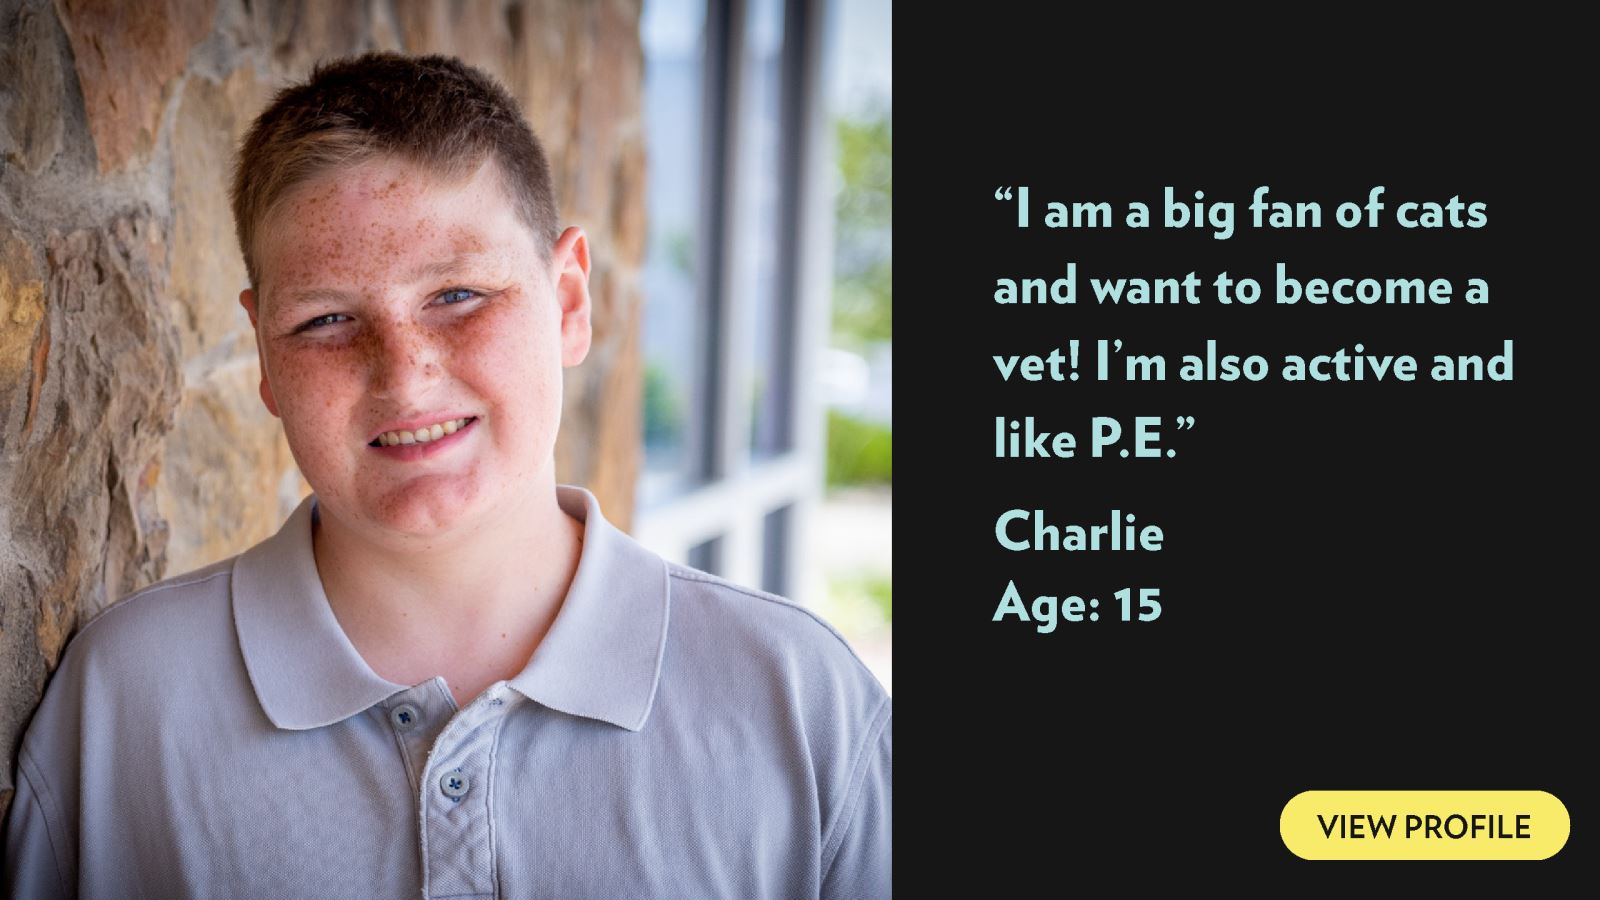 I am a big fan of cats and want to become a vet! I’m also active and like P.E. Charlie, age 15. View profile.